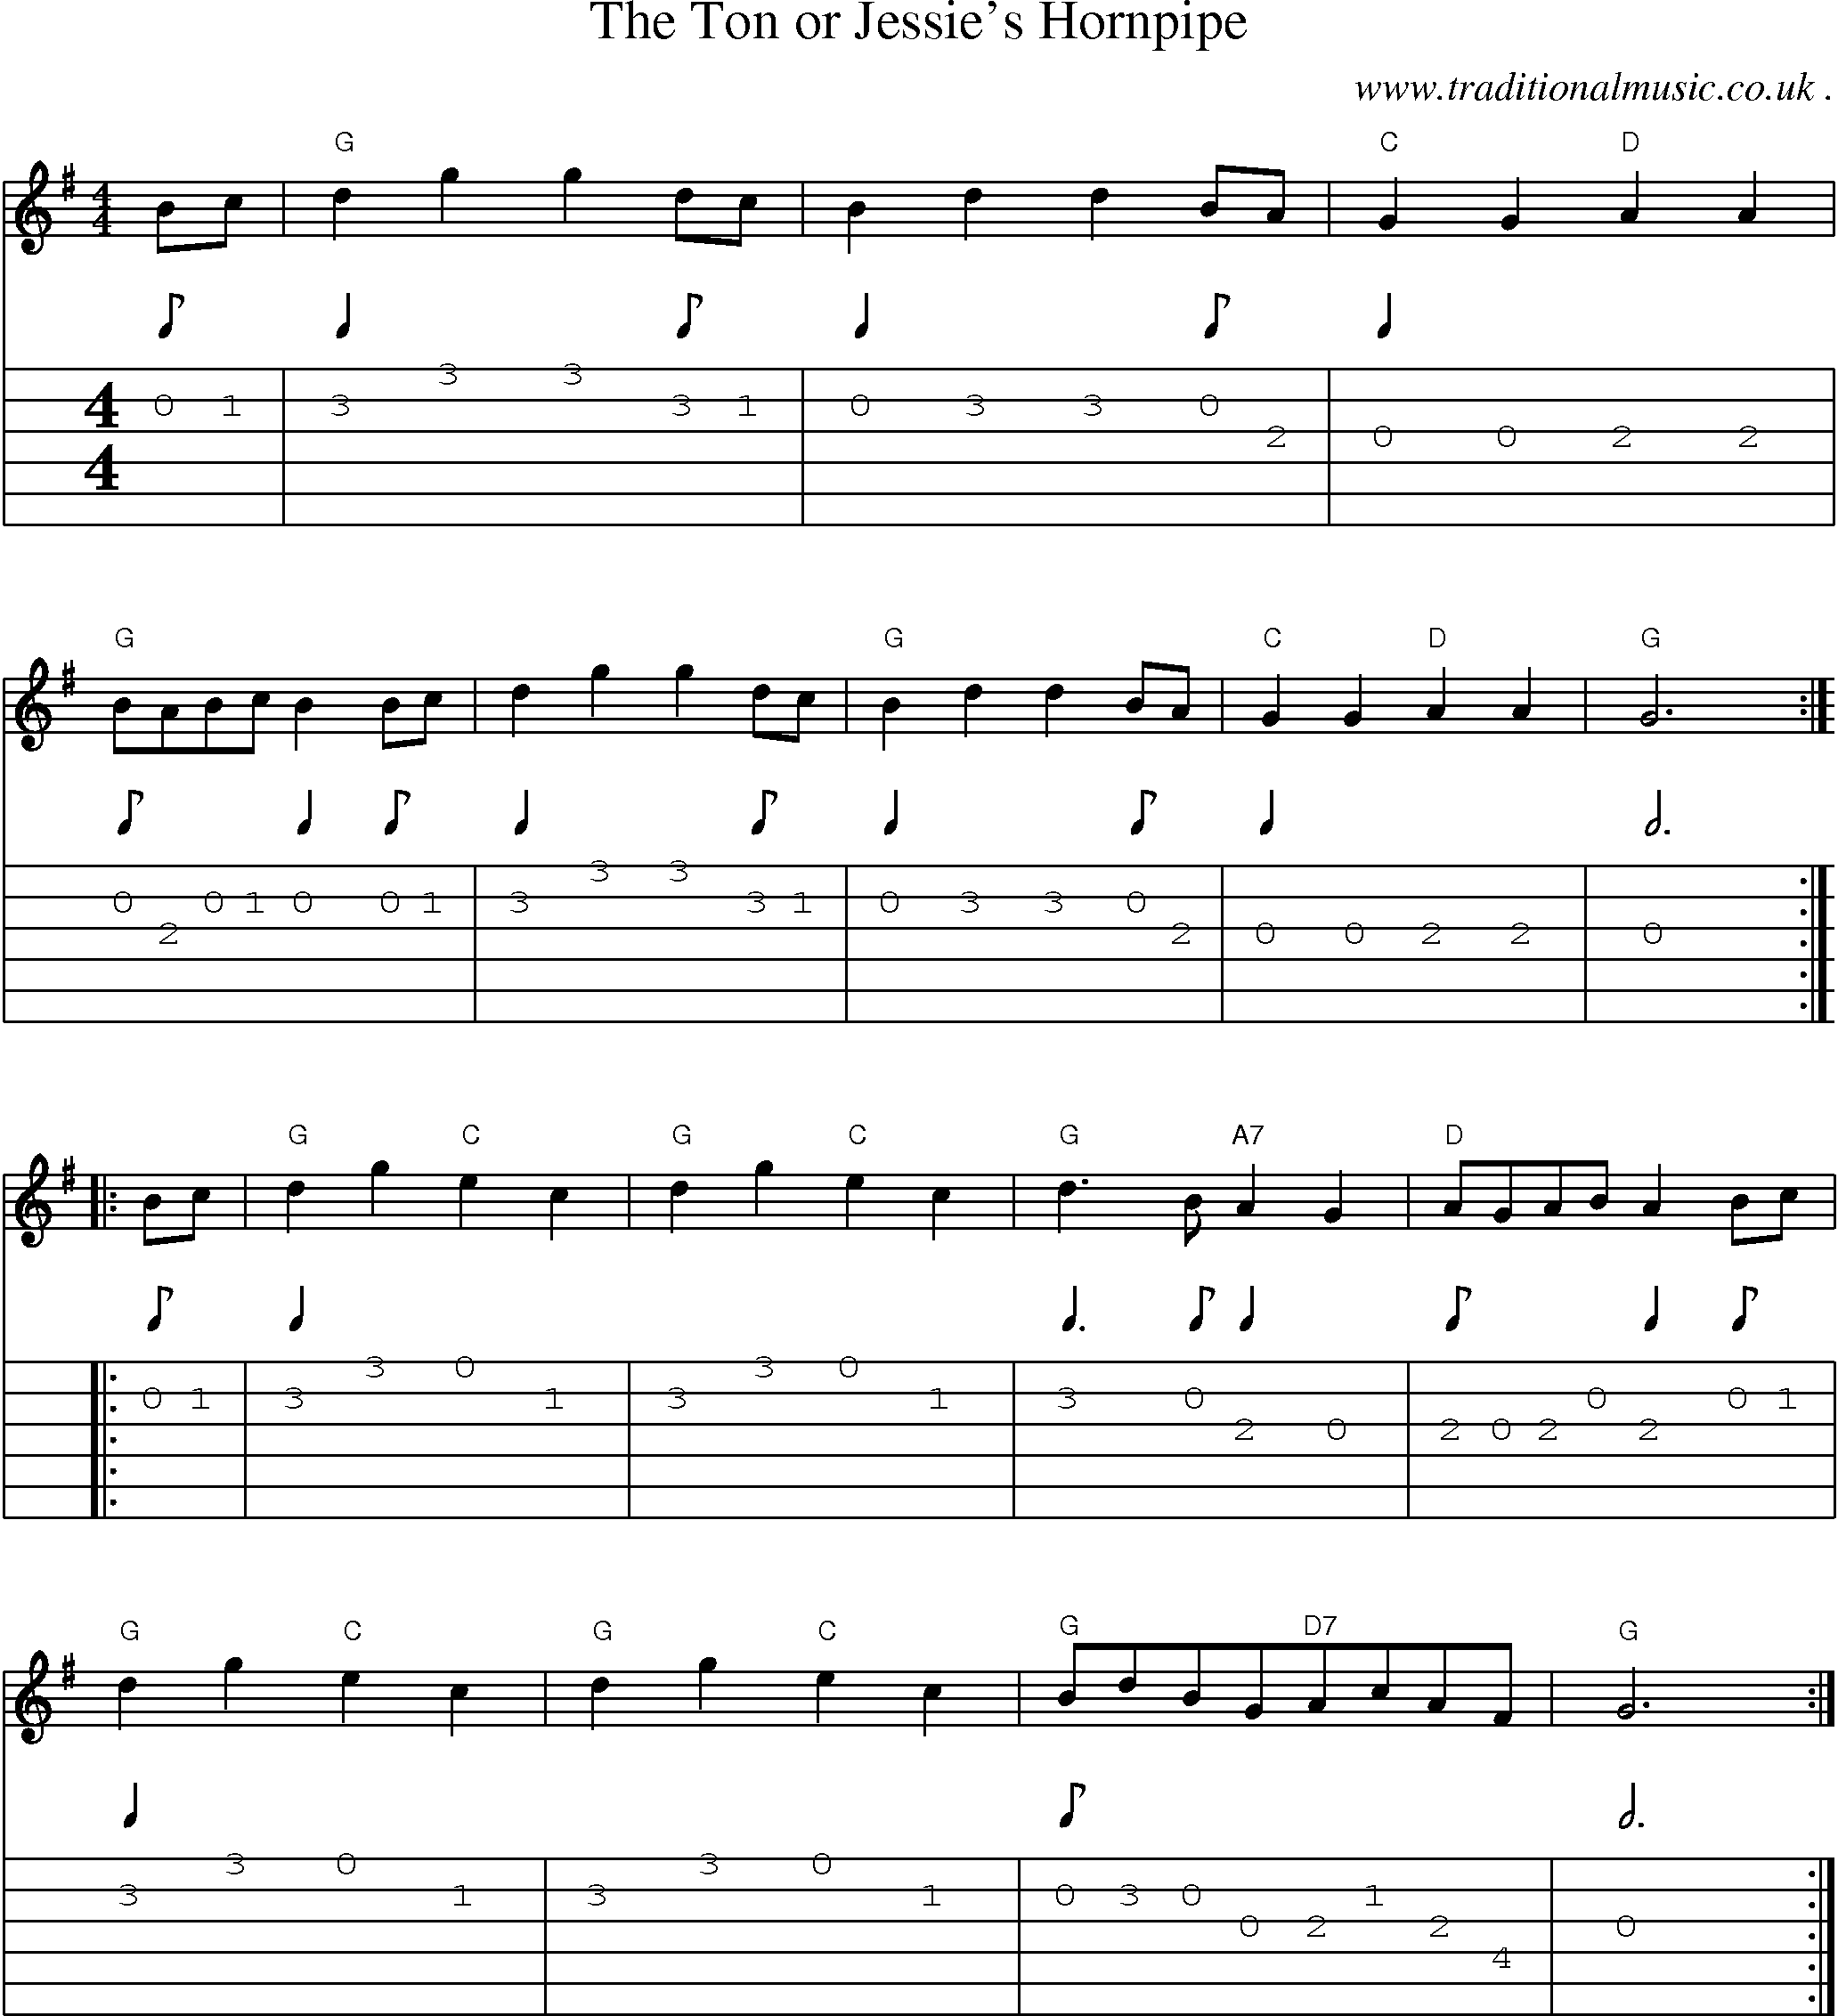 Sheet-Music and Guitar Tabs for The Ton Or Jessies Hornpipe